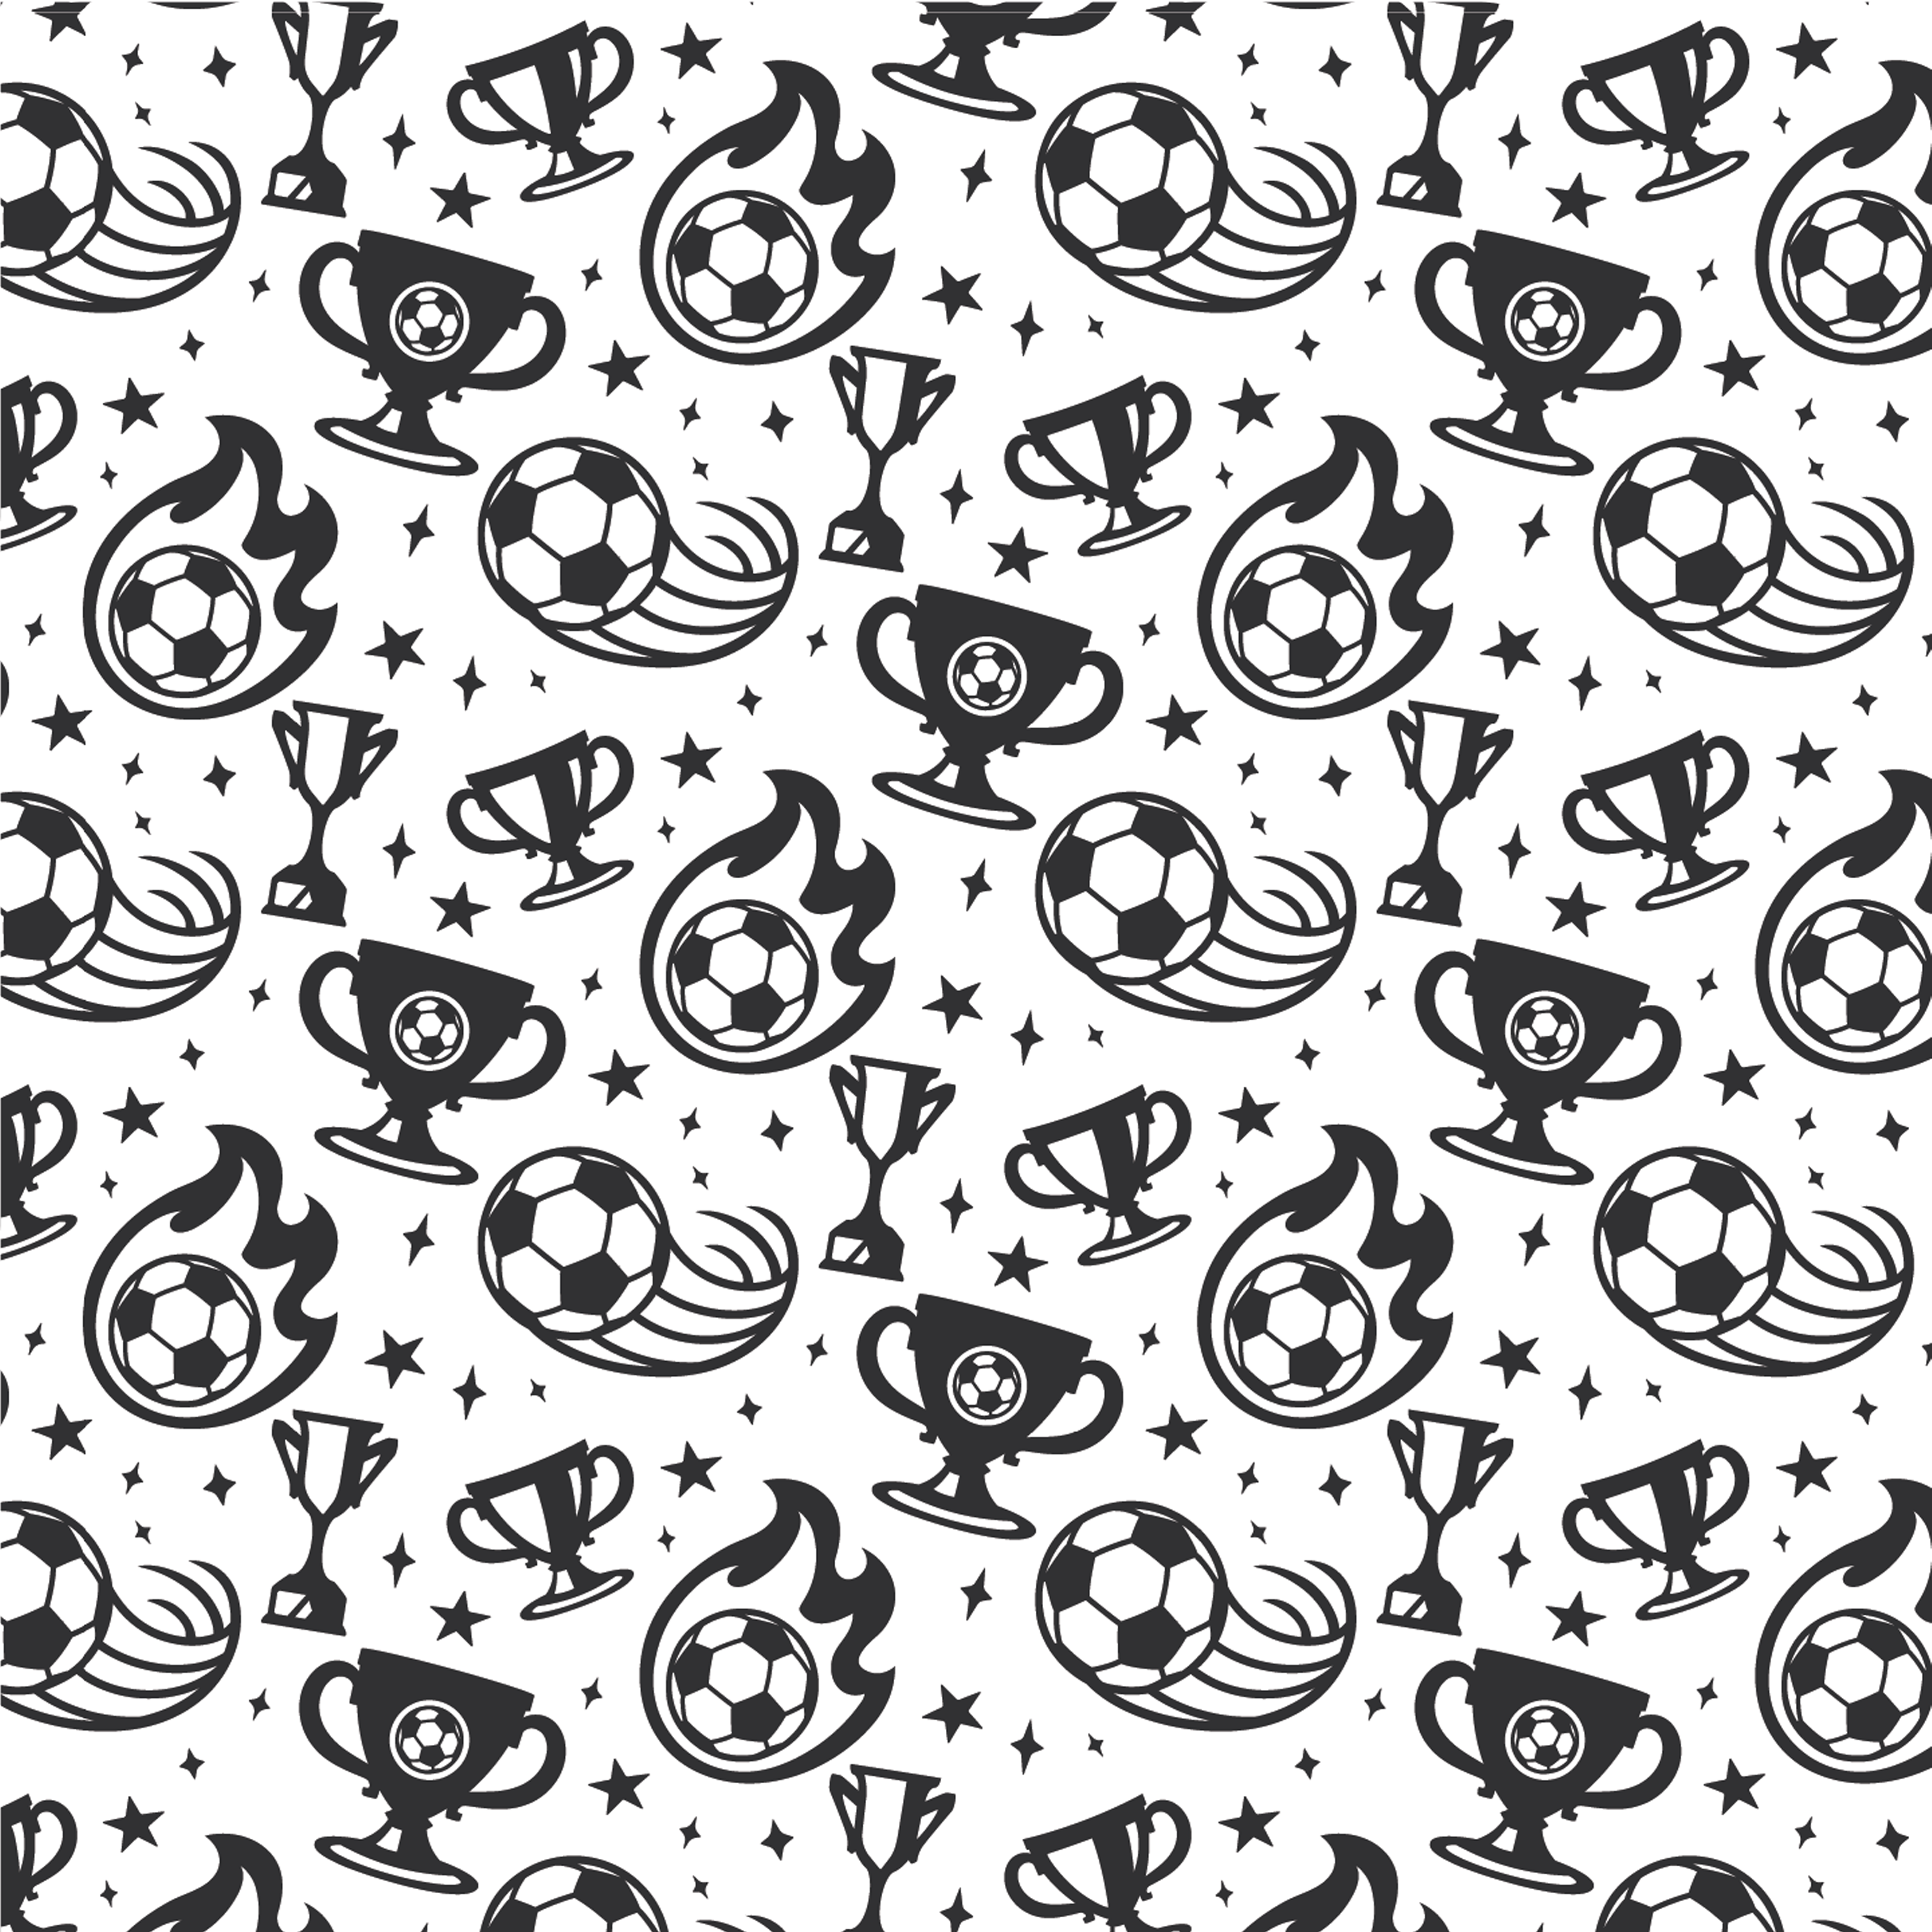 soccer-cup-pattern-design-theme